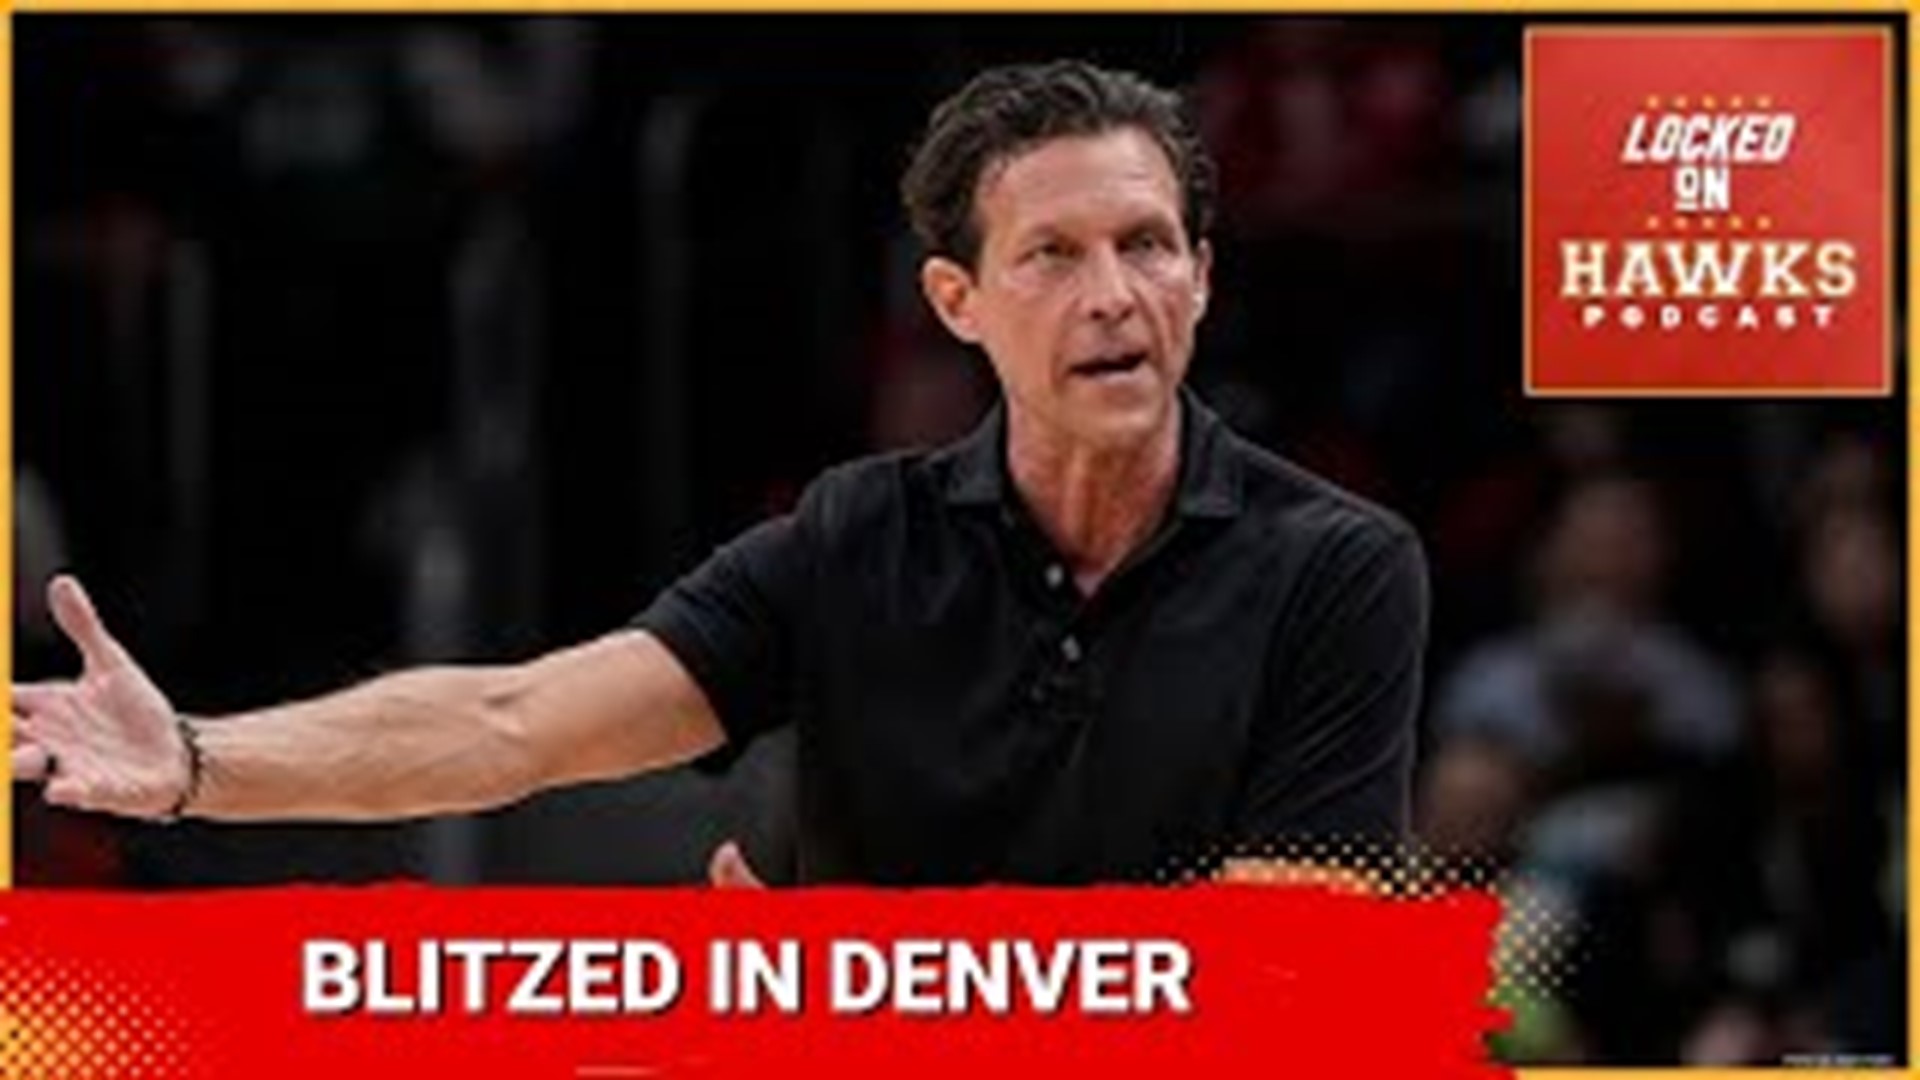 Brad Rowland hosts episode No. 1689 of the Locked on Hawks podcast. The show breaks down Saturday's game between the Atlanta Hawks and the Denver Nuggets.